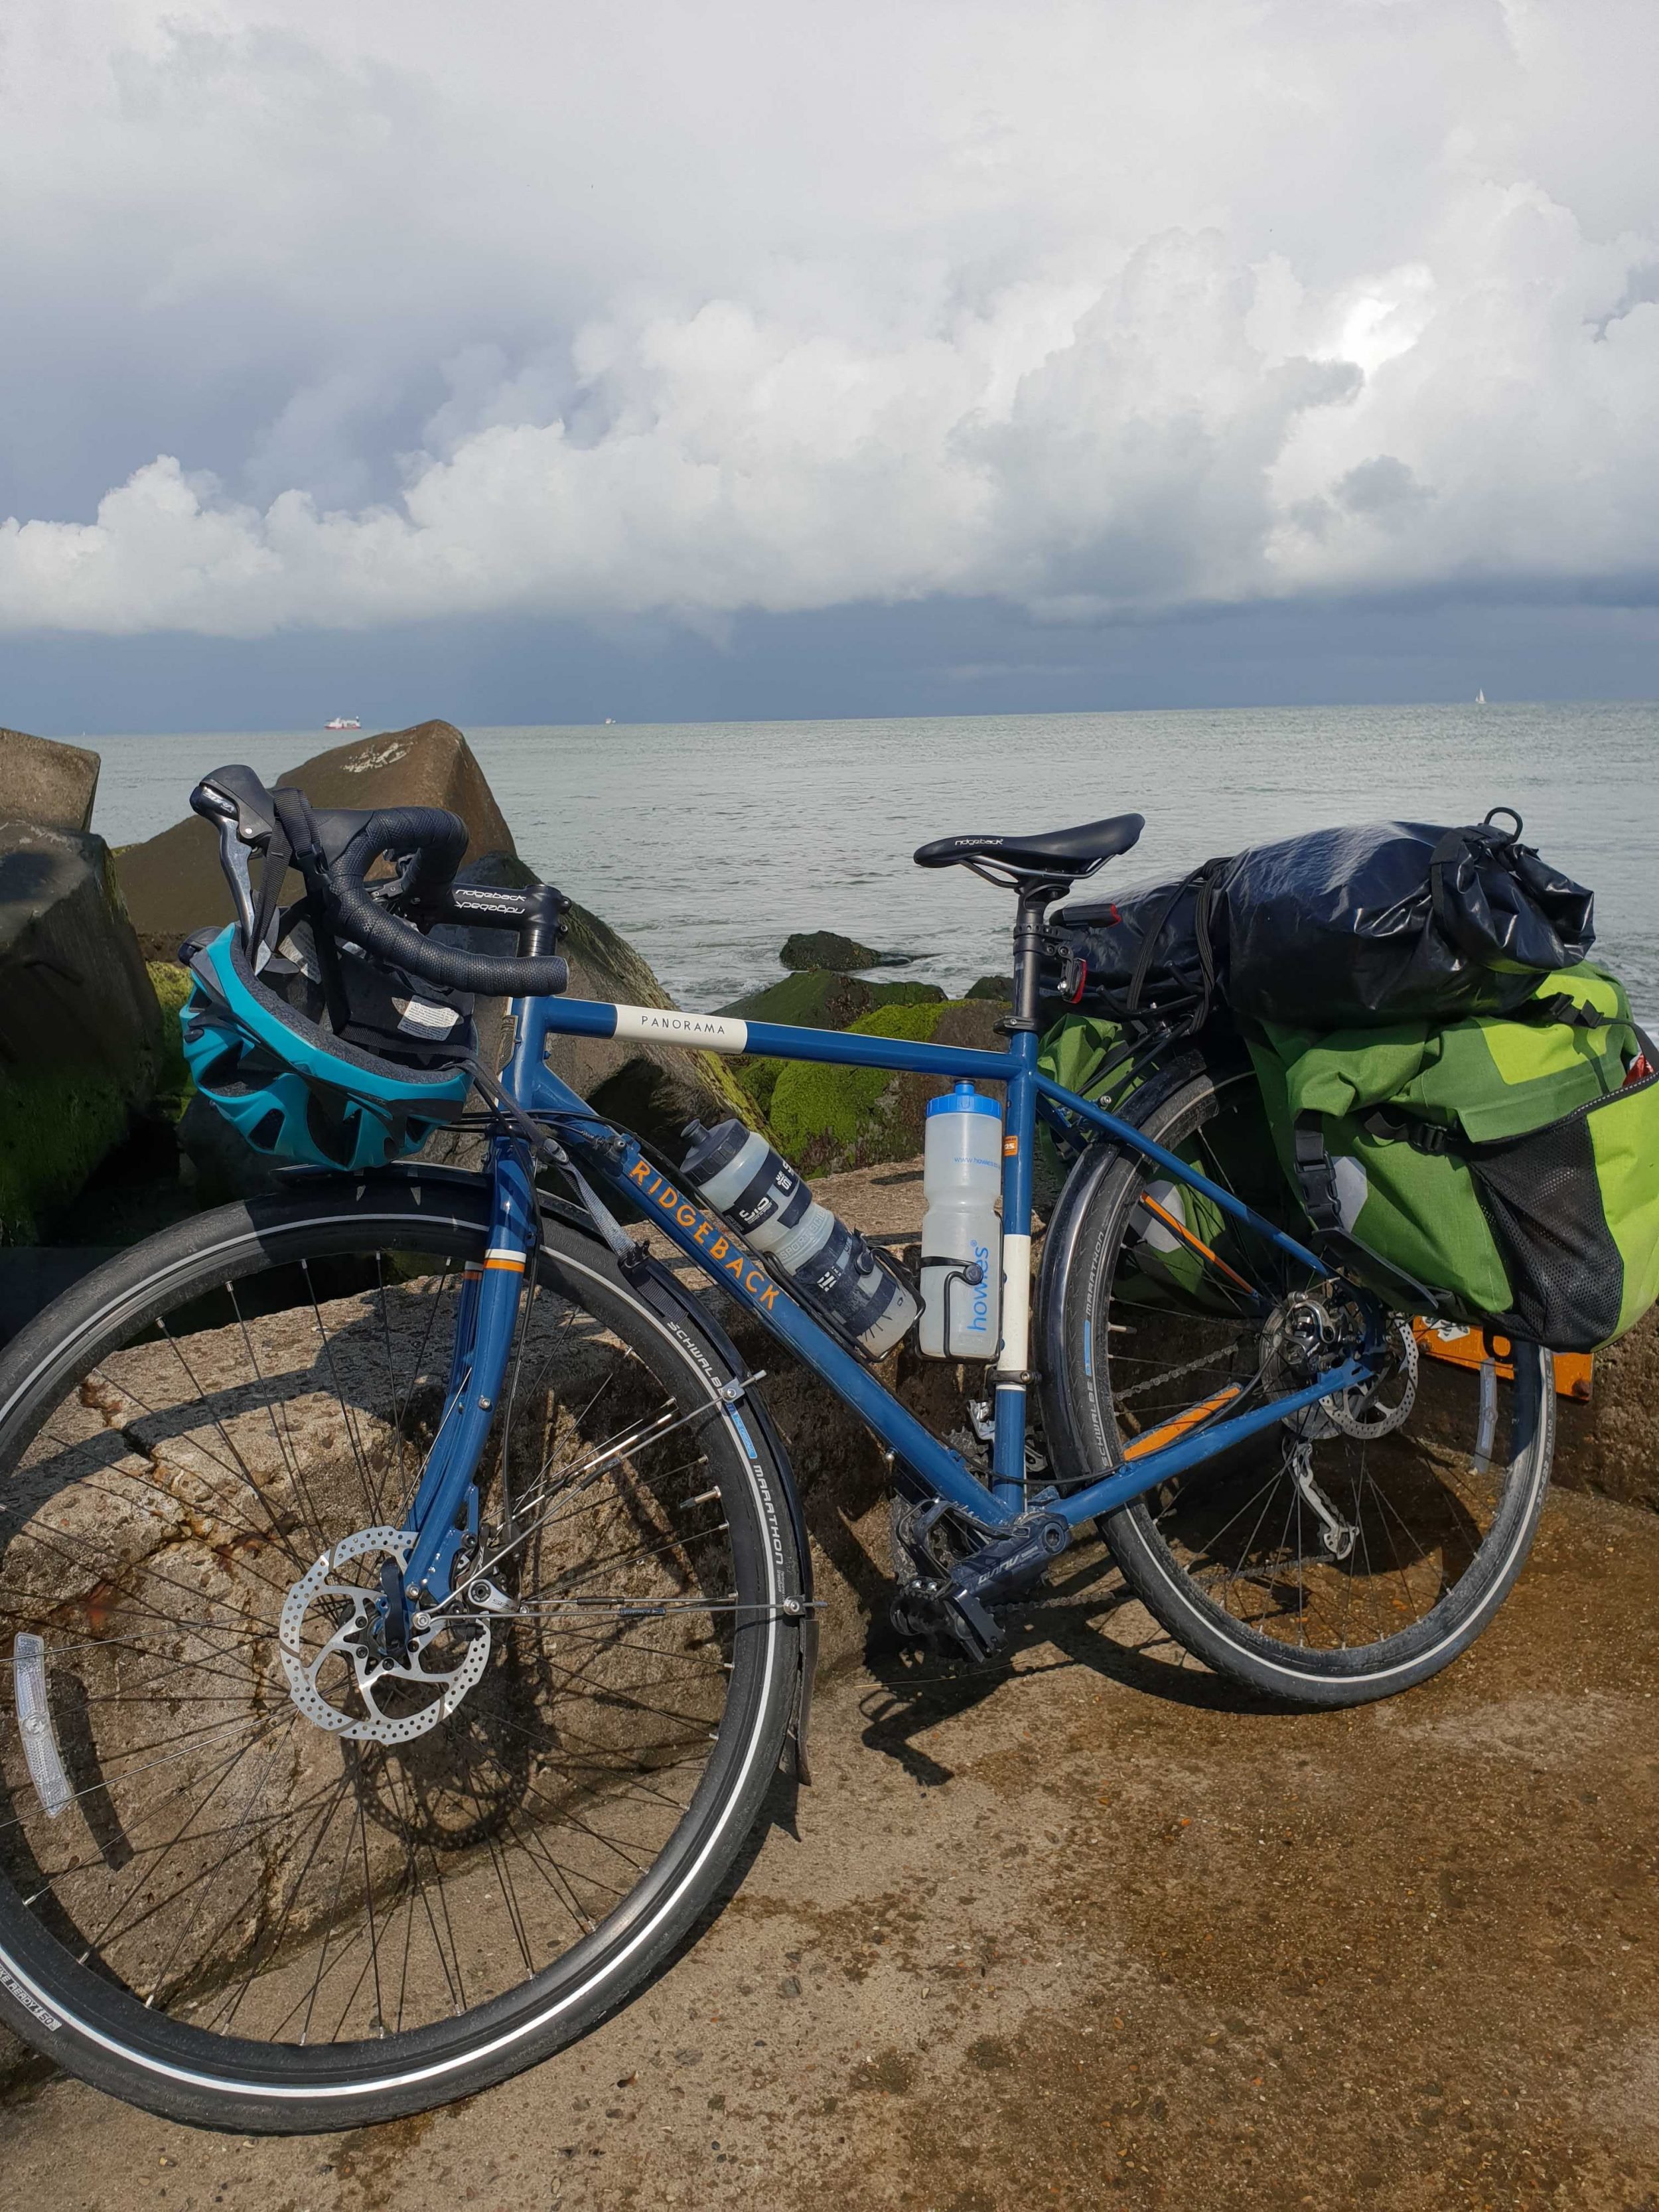 A fully packed touring bicycle, with the sea behind.